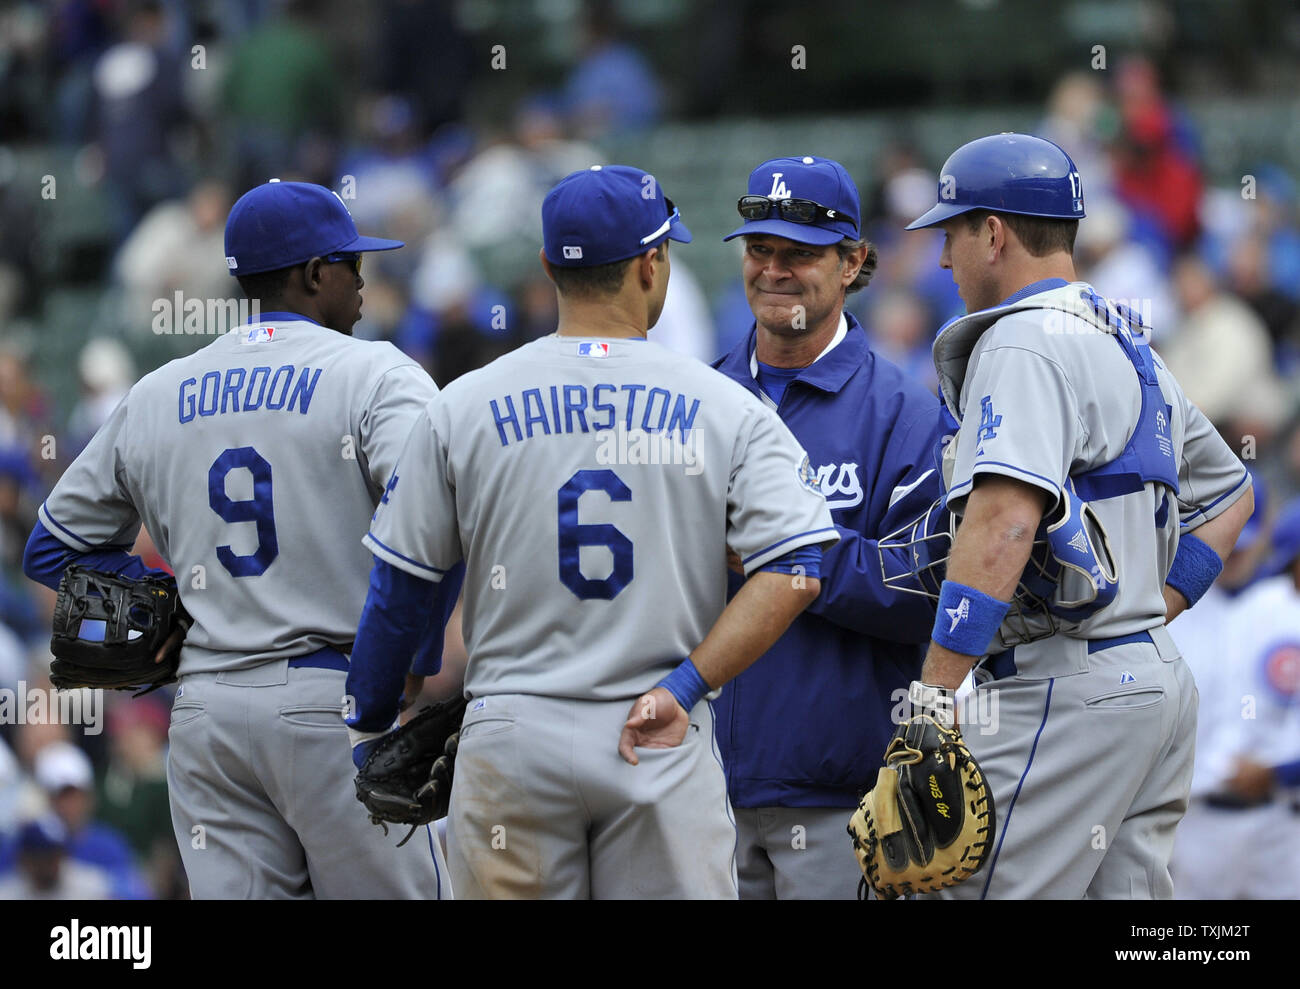 Los Angeles Dodgers manager Don Mattingly (second right) stands on